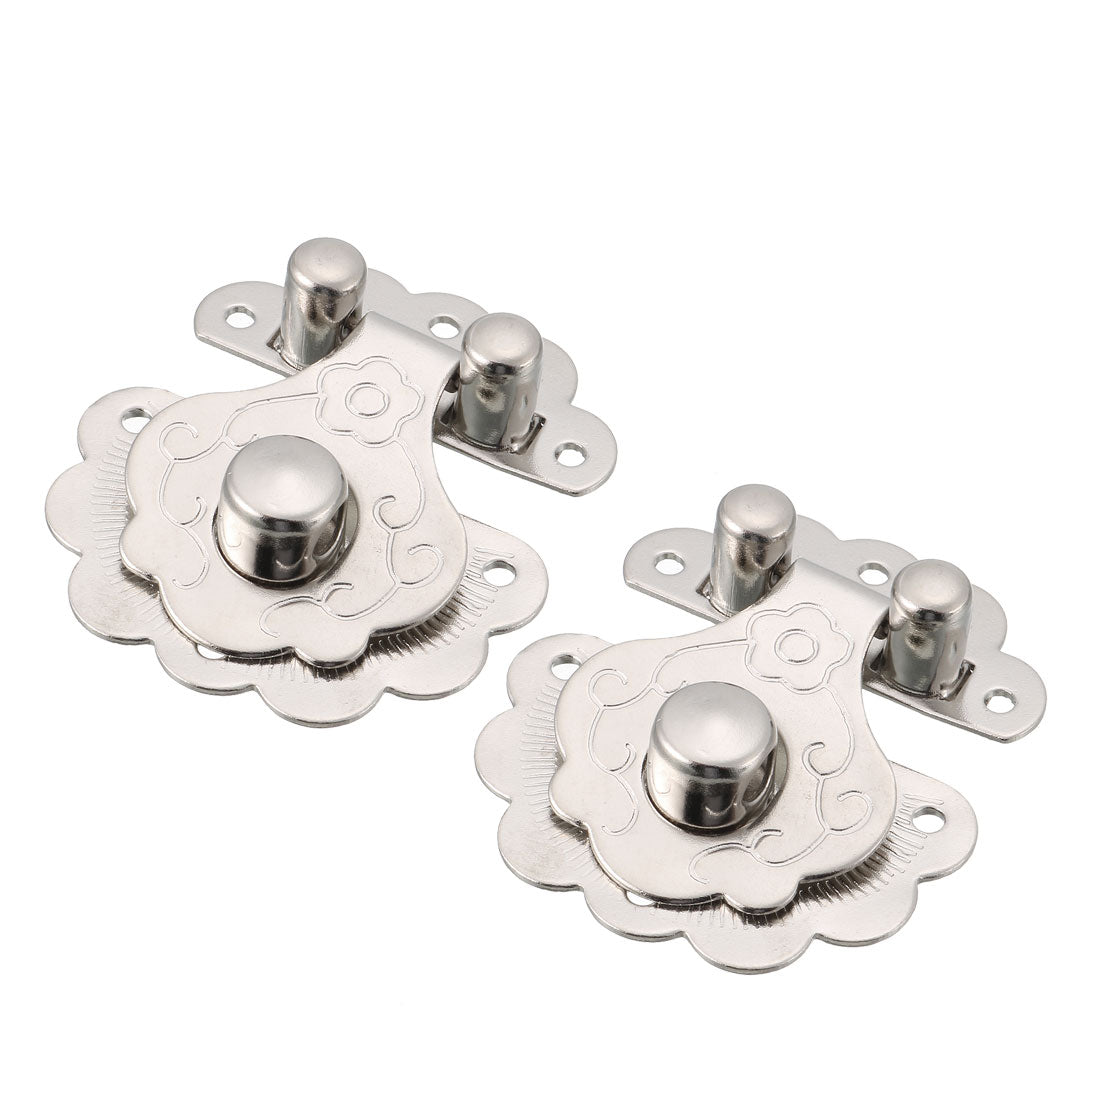 uxcell Uxcell Jewelry Box Flower Shaped Latches Hasp Catch Lock Silver Tone 33x32x10mm 2pcs